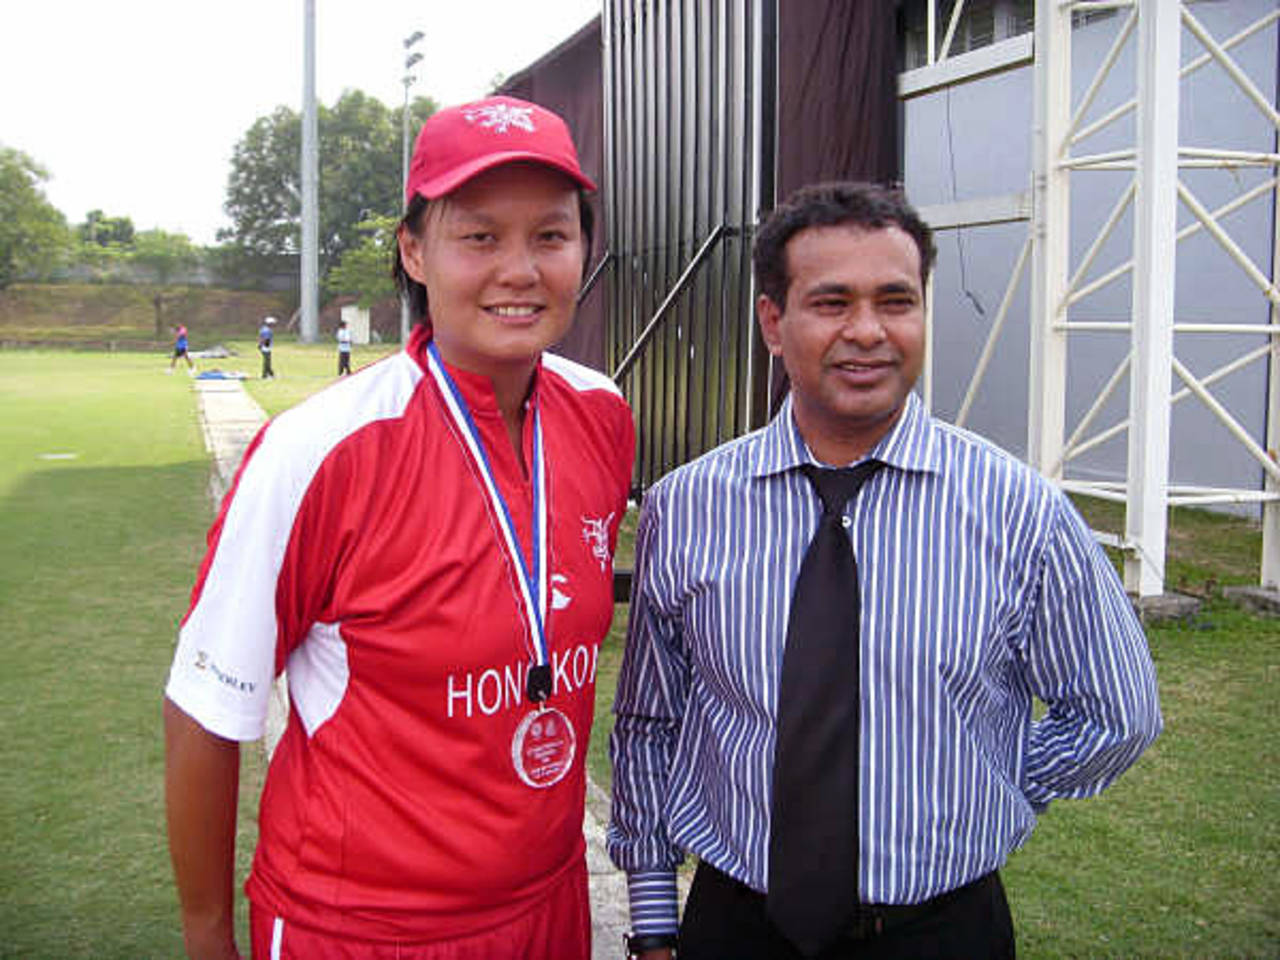 Connie Wong receives her Player of the Match Award from Mr. KK Haridas, ACC Events Executive, after claiming 4-8 against Oman Women at the ACC Women's Twenty20 Championships 2009 being played in Kuala Lumpur, Malaysia